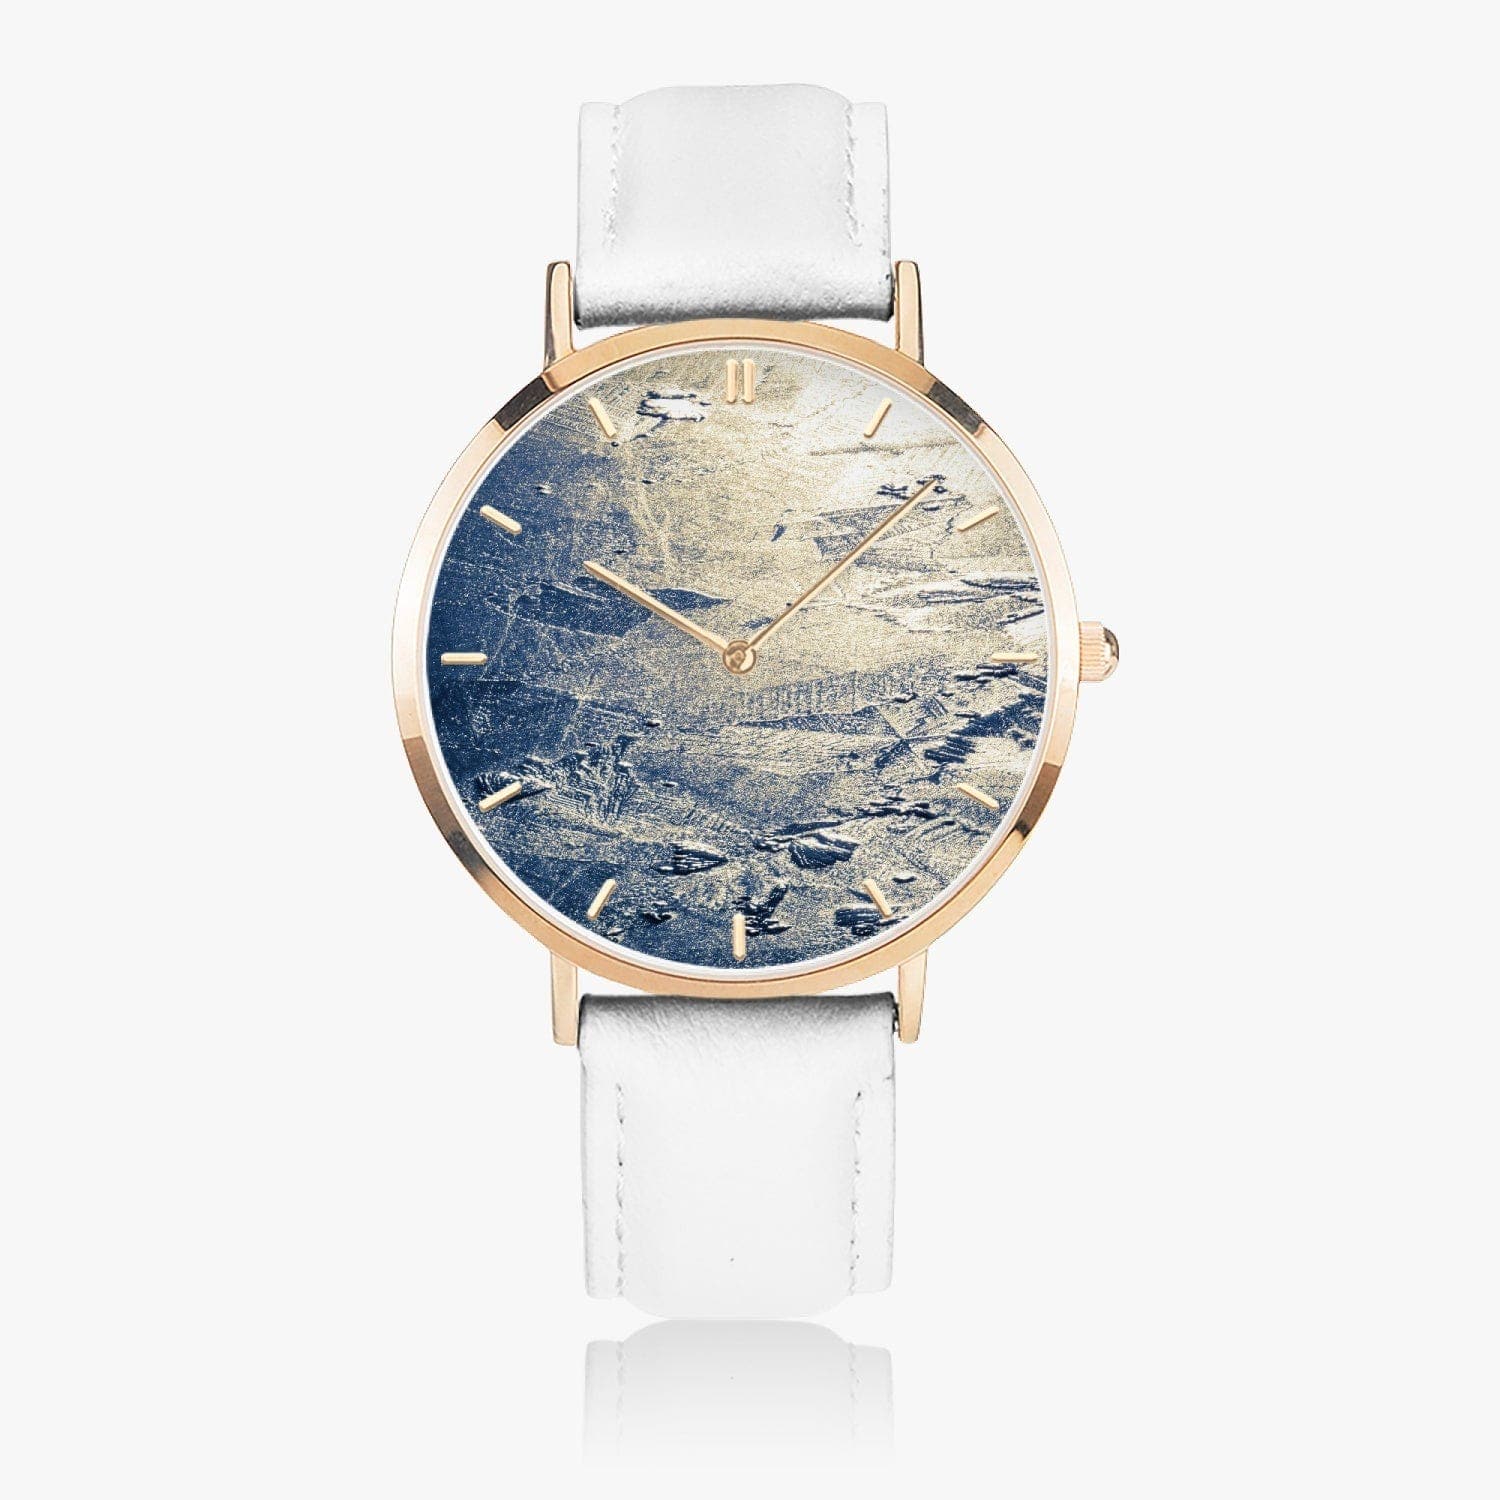 Frozen Time. Hot Selling Ultra-Thin Leather Strap Quartz Watch (Rose Gold With Indicators). Designer watch by Ingrid Hütten